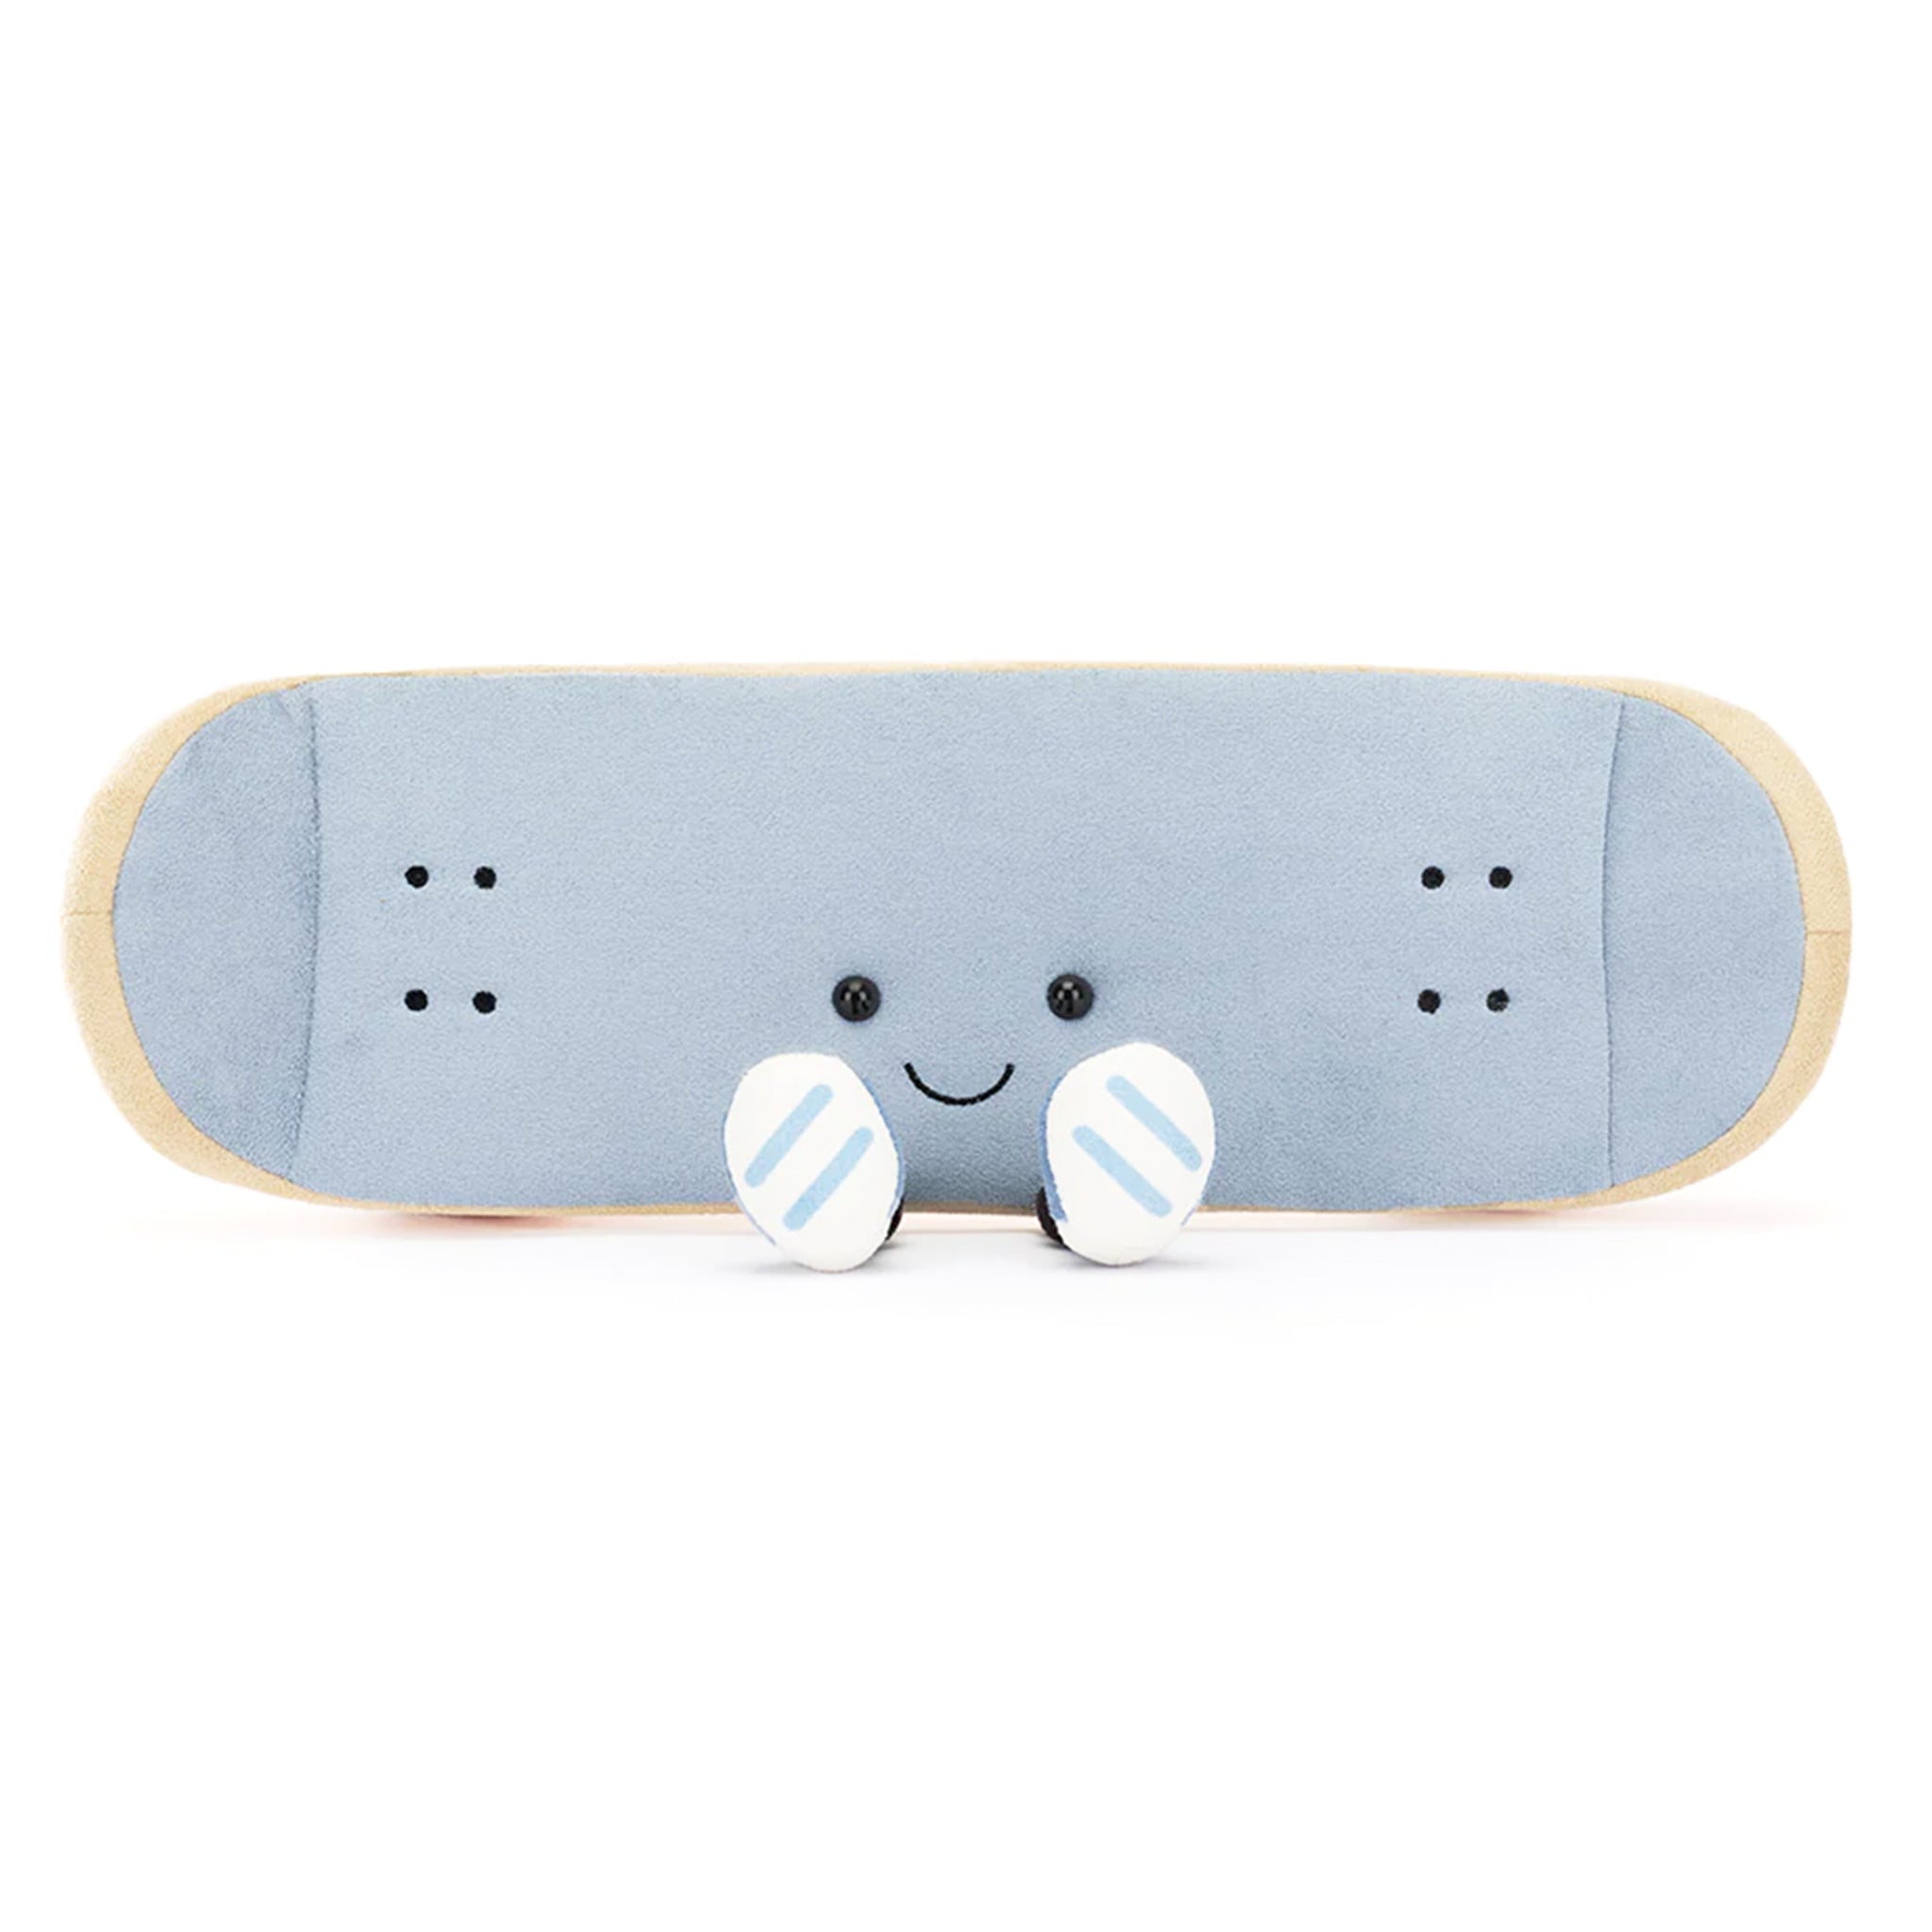 A skateboard shaped stuffed toy with small legs and feet and a smiling face. 